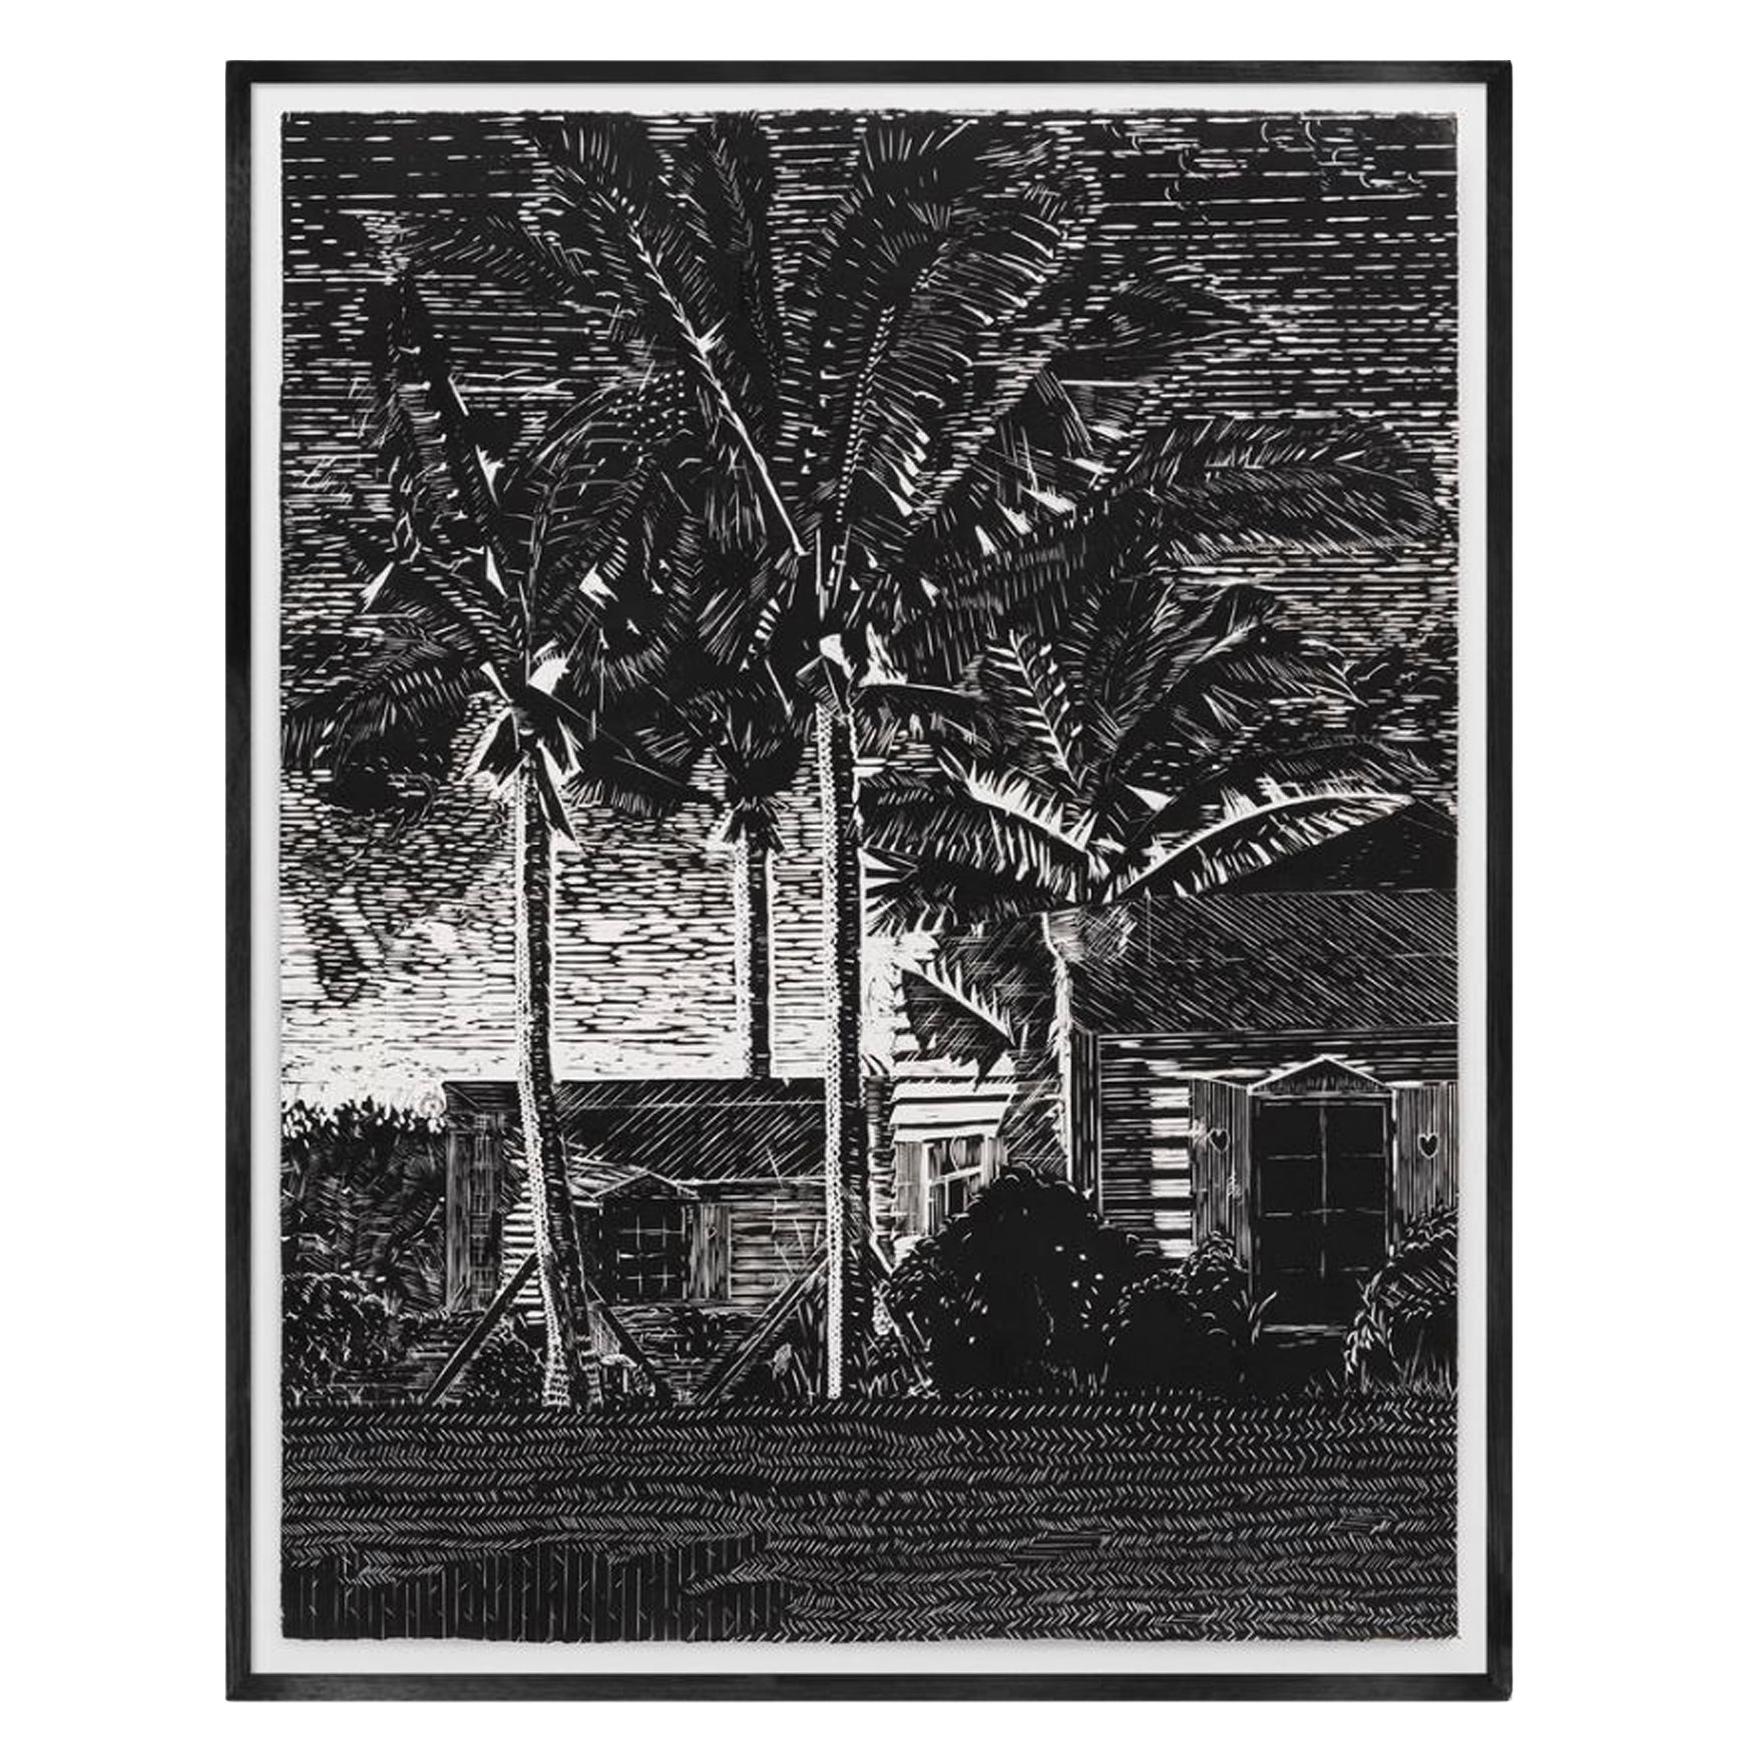 "Landscape" Artwork, Linocut and Etching Technique, Black and White by Miki Leal For Sale